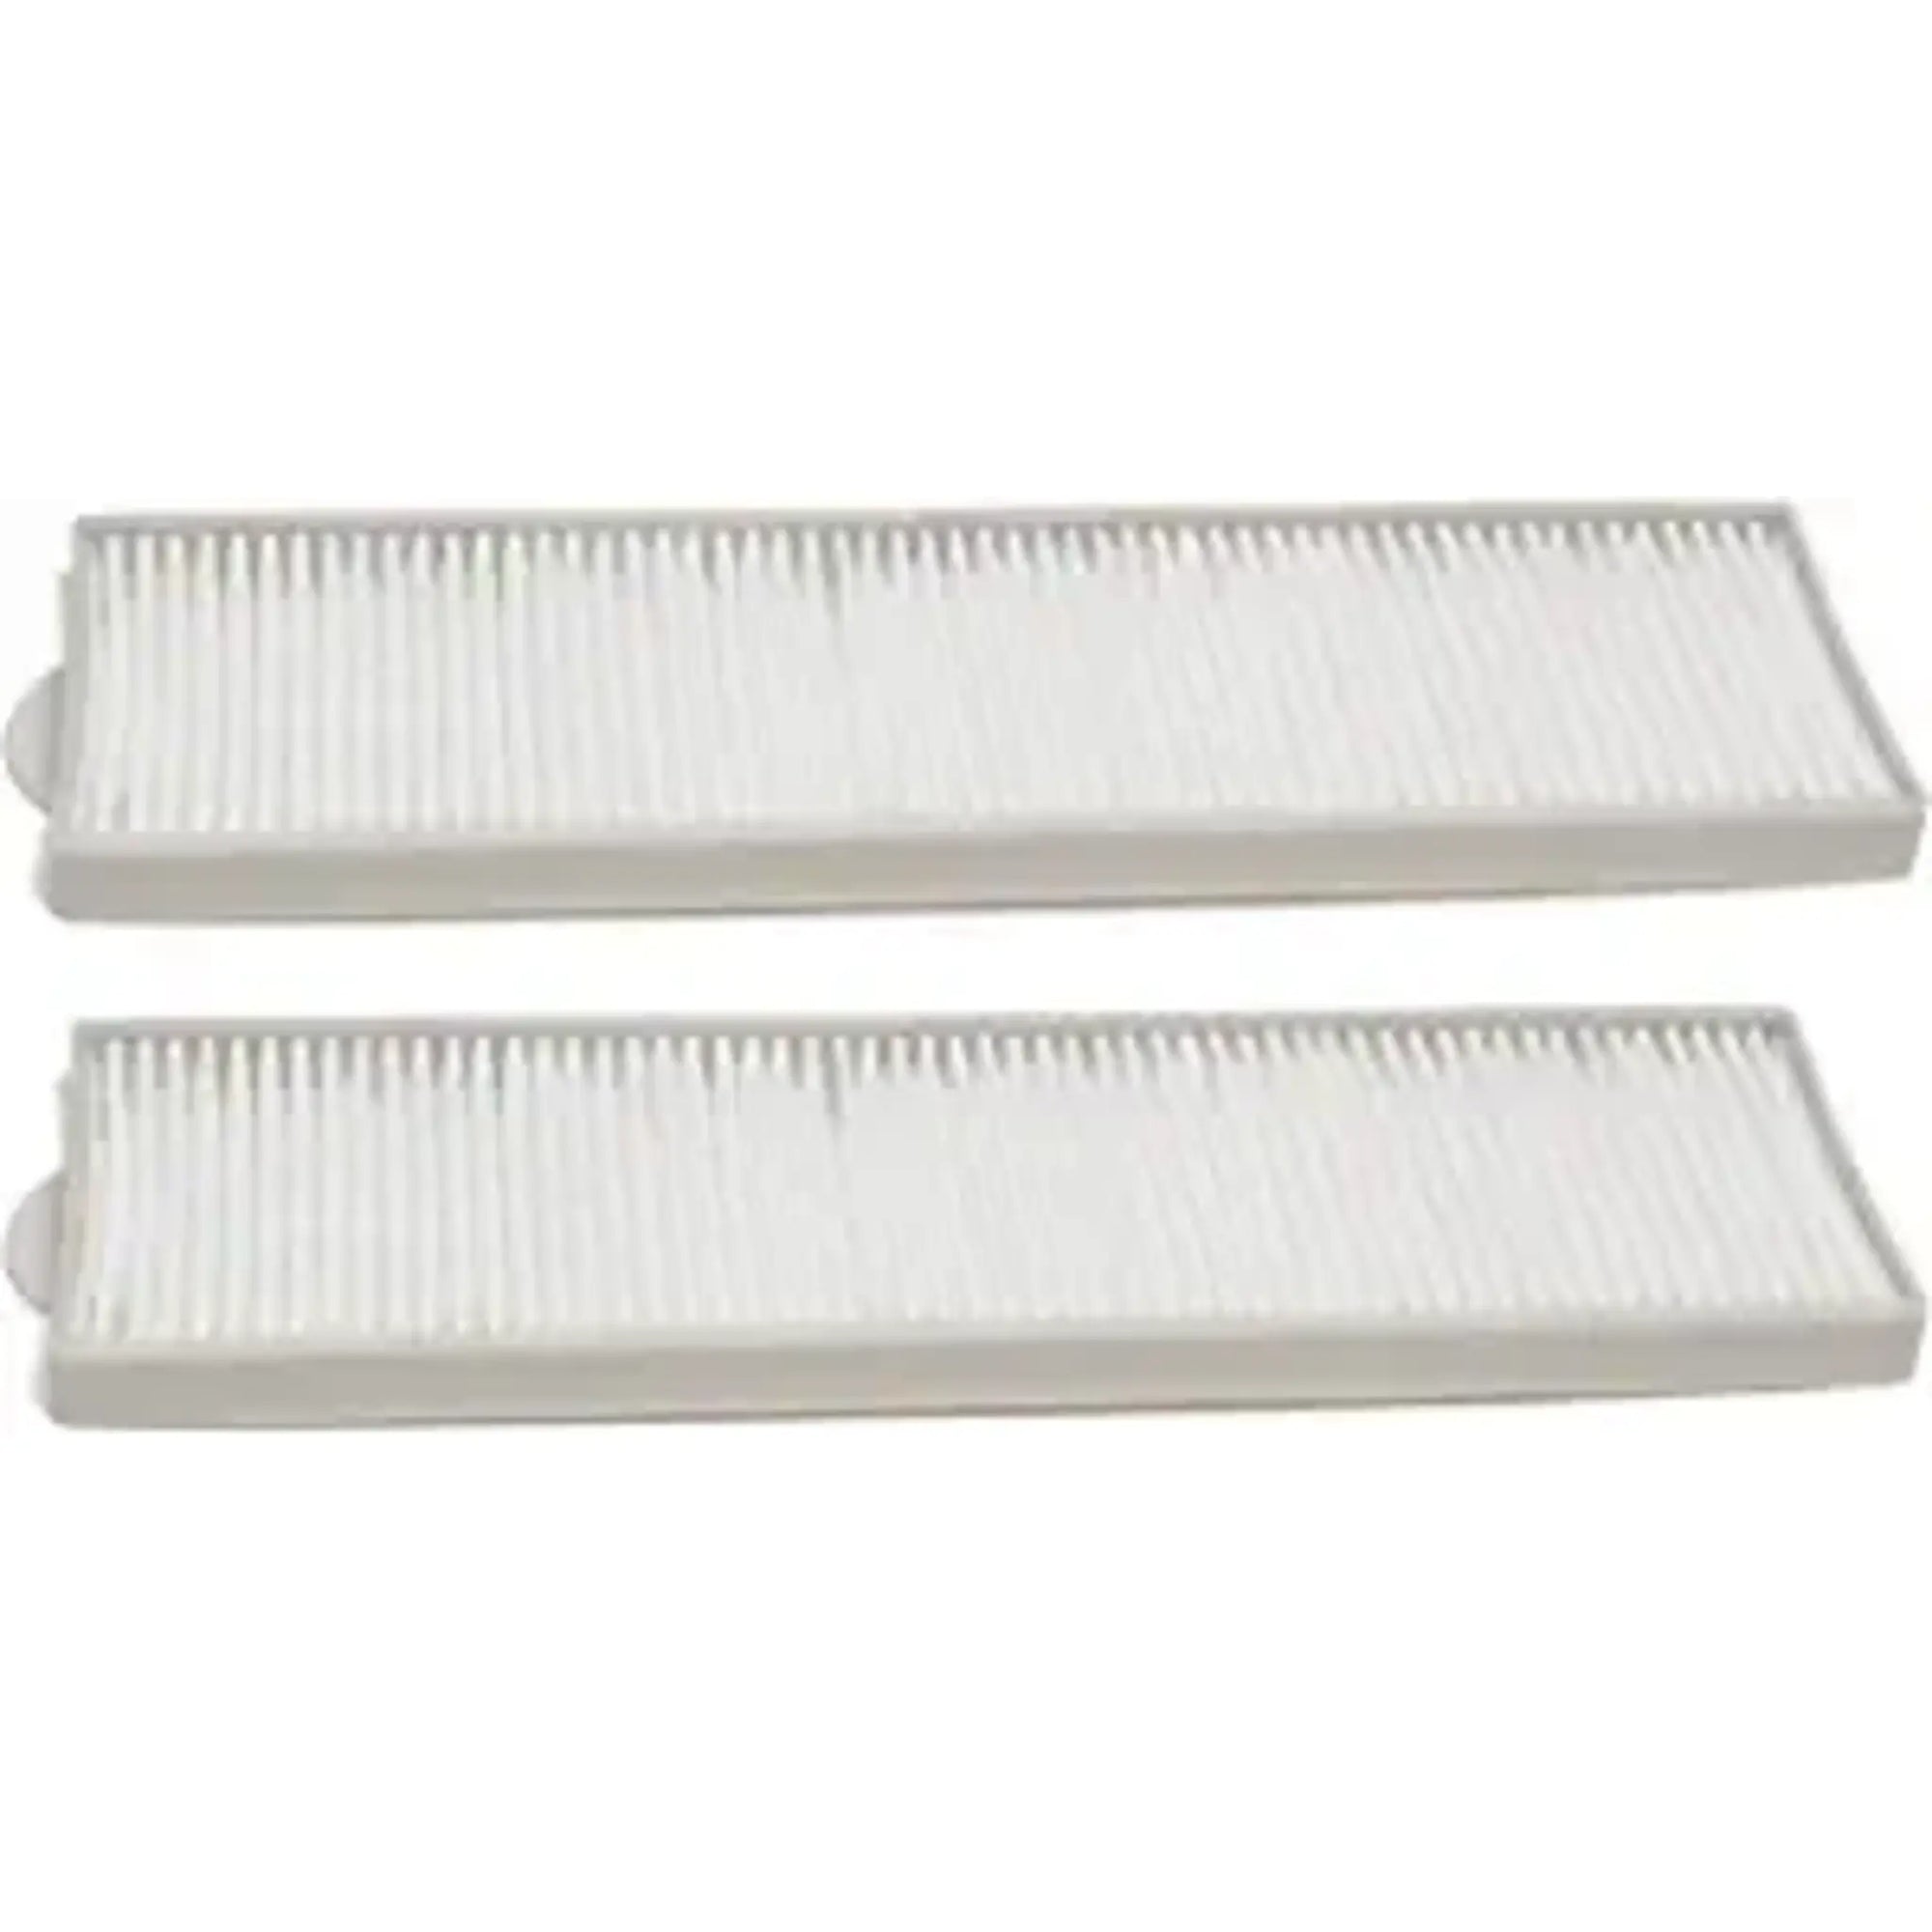 Nispira HEPA Filter 8 and 14 for Bissell Vacuum Upright 3091, 3750/6595 Lift-Off series